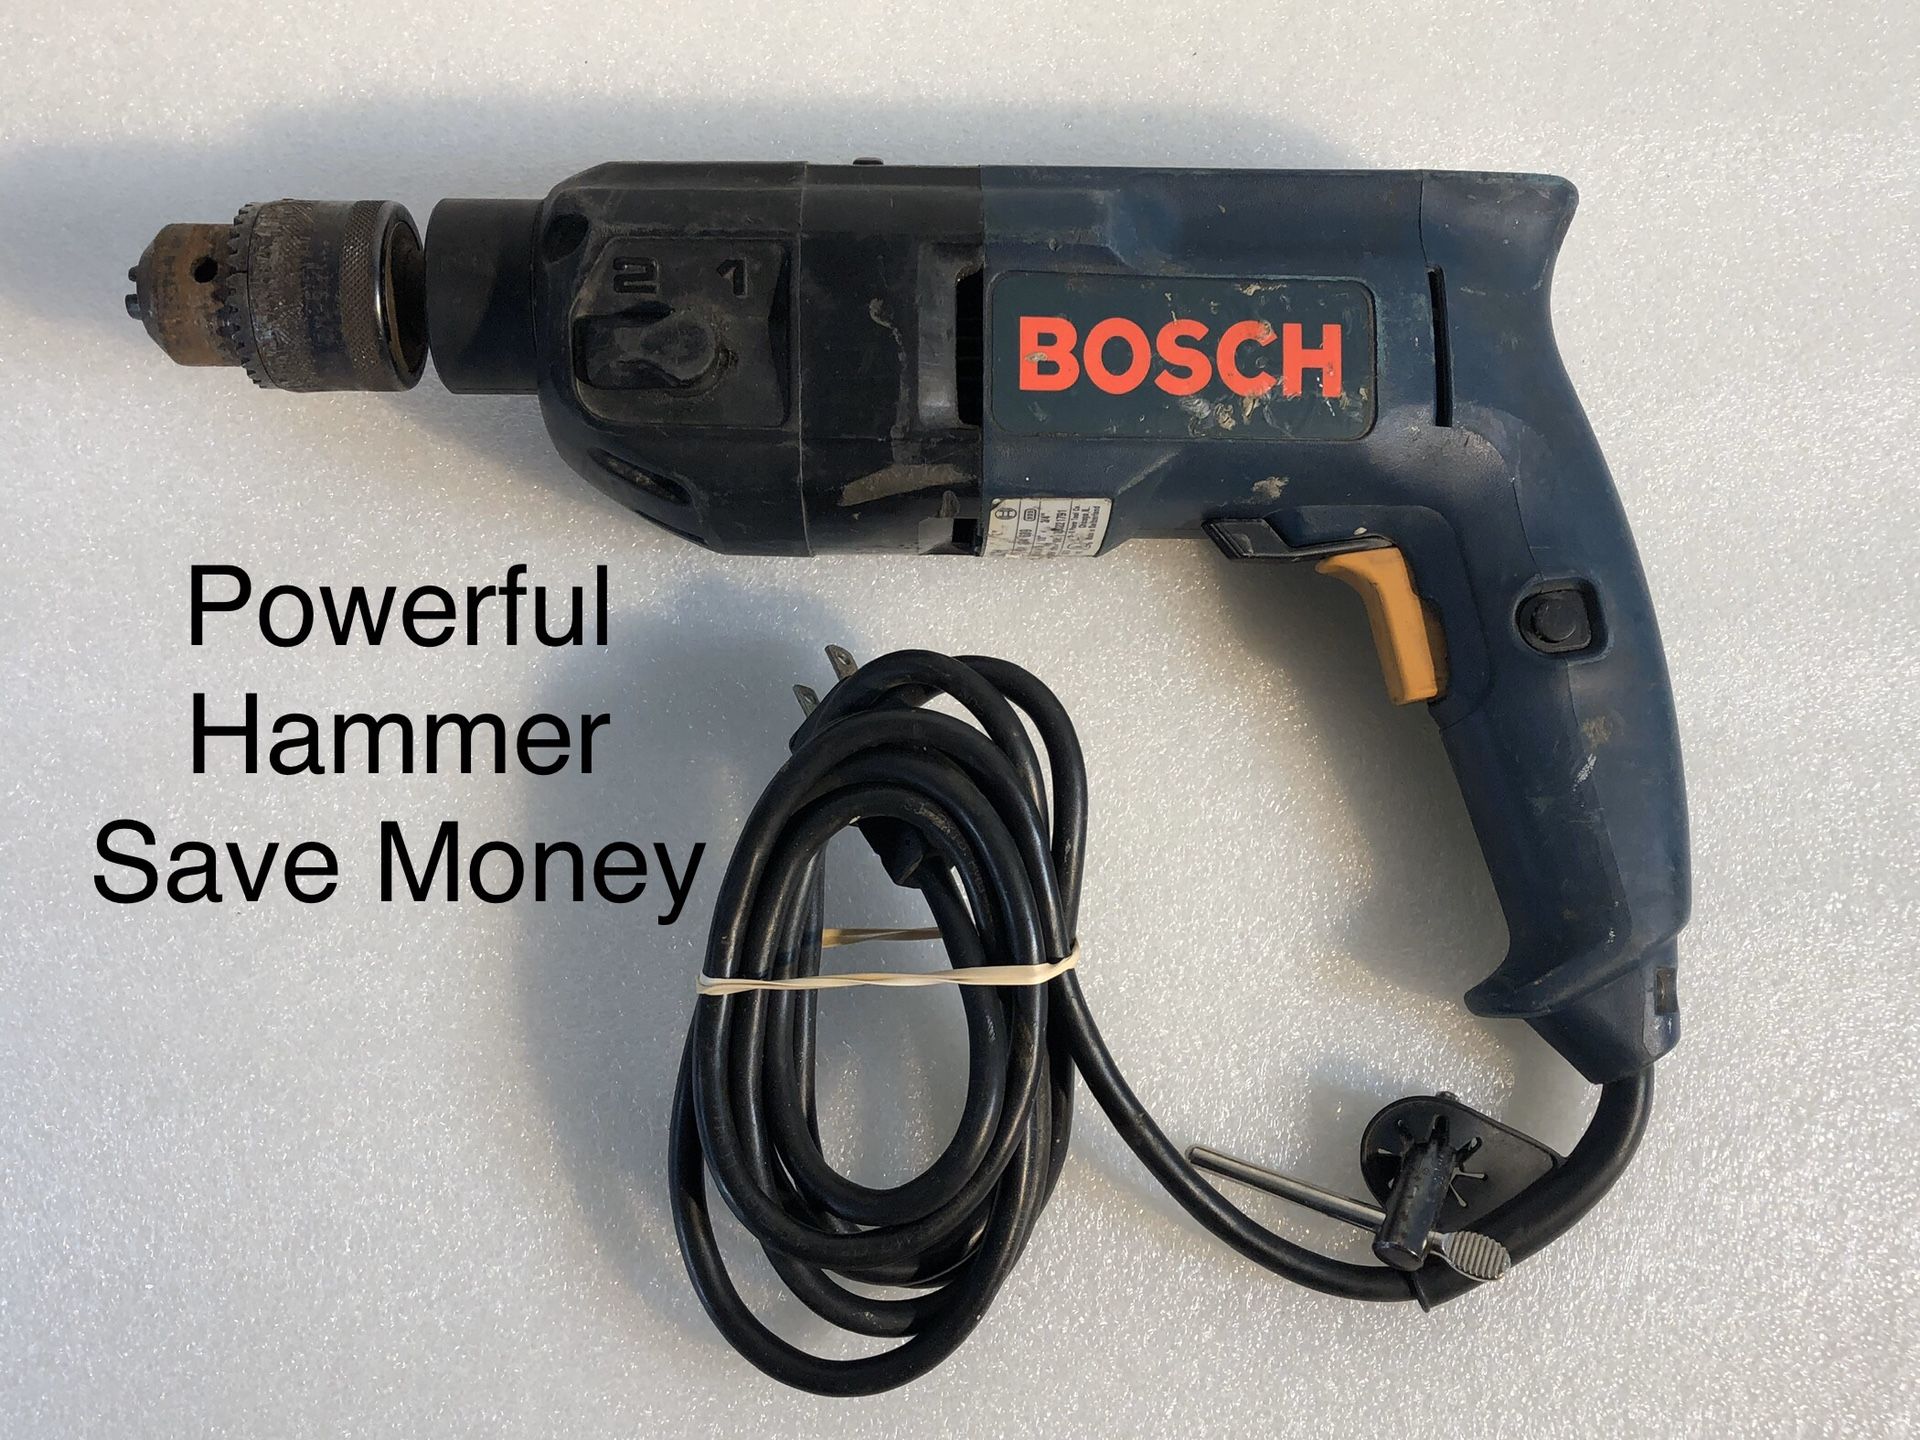 Bosh 7 Amp Corded 1/2 in. Concrete/Masonry Variable Speed Hammer Drill Kit - Works Great